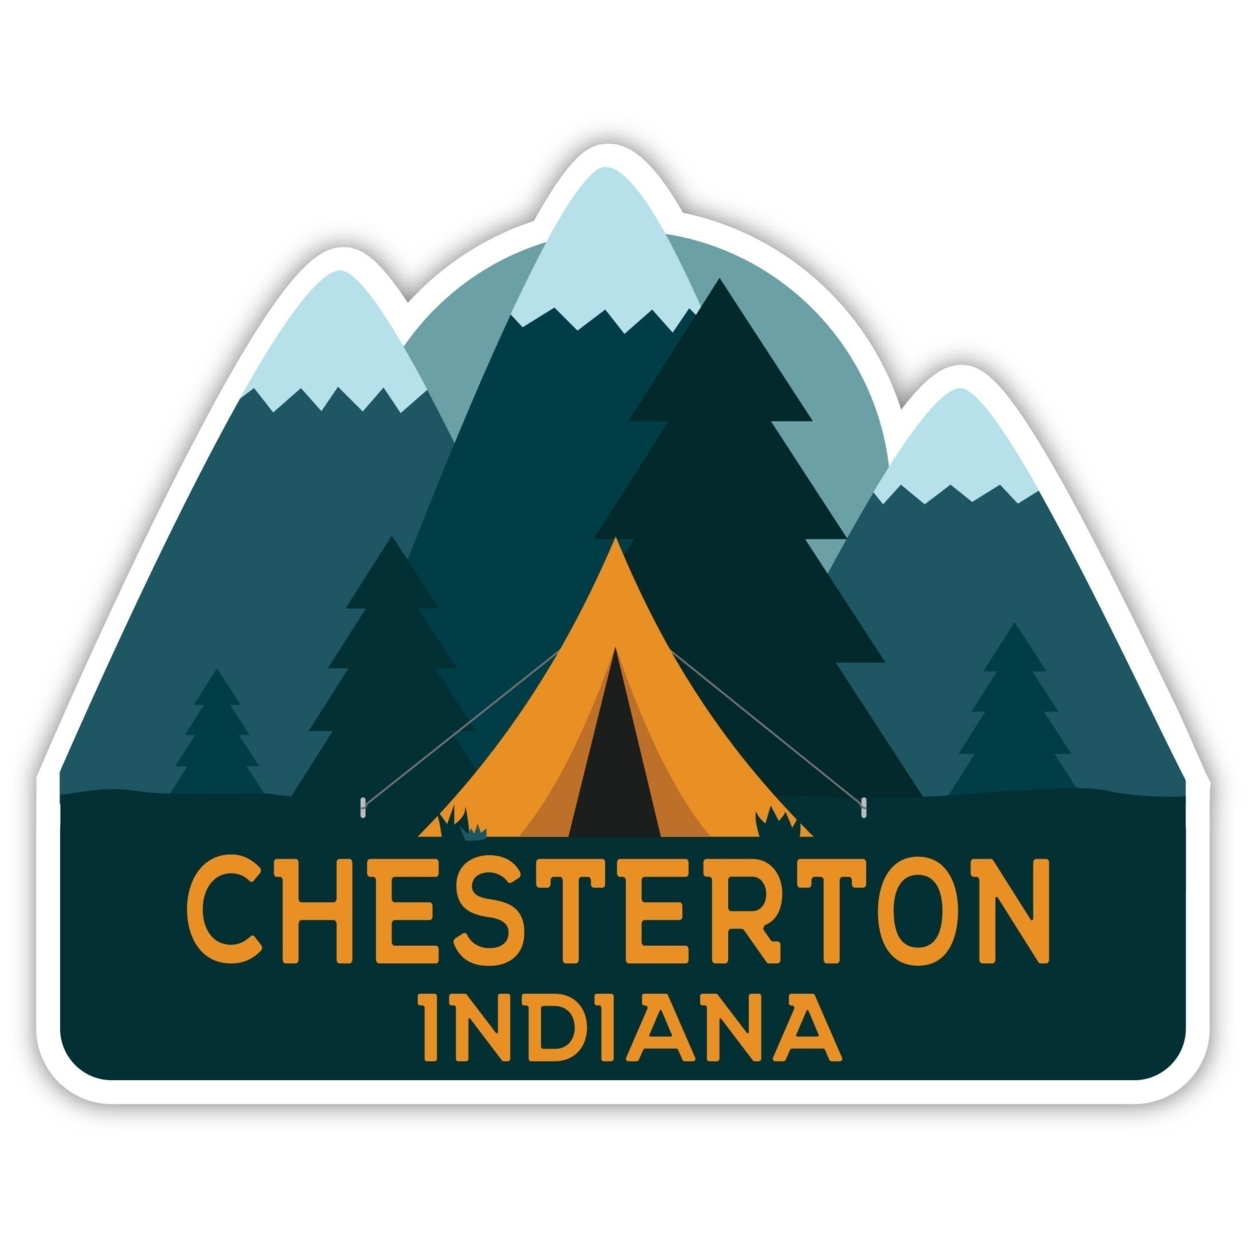 Chesterton Indiana Souvenir Decorative Stickers (Choose Theme And Size) - 4-Pack, 2-Inch, Bear